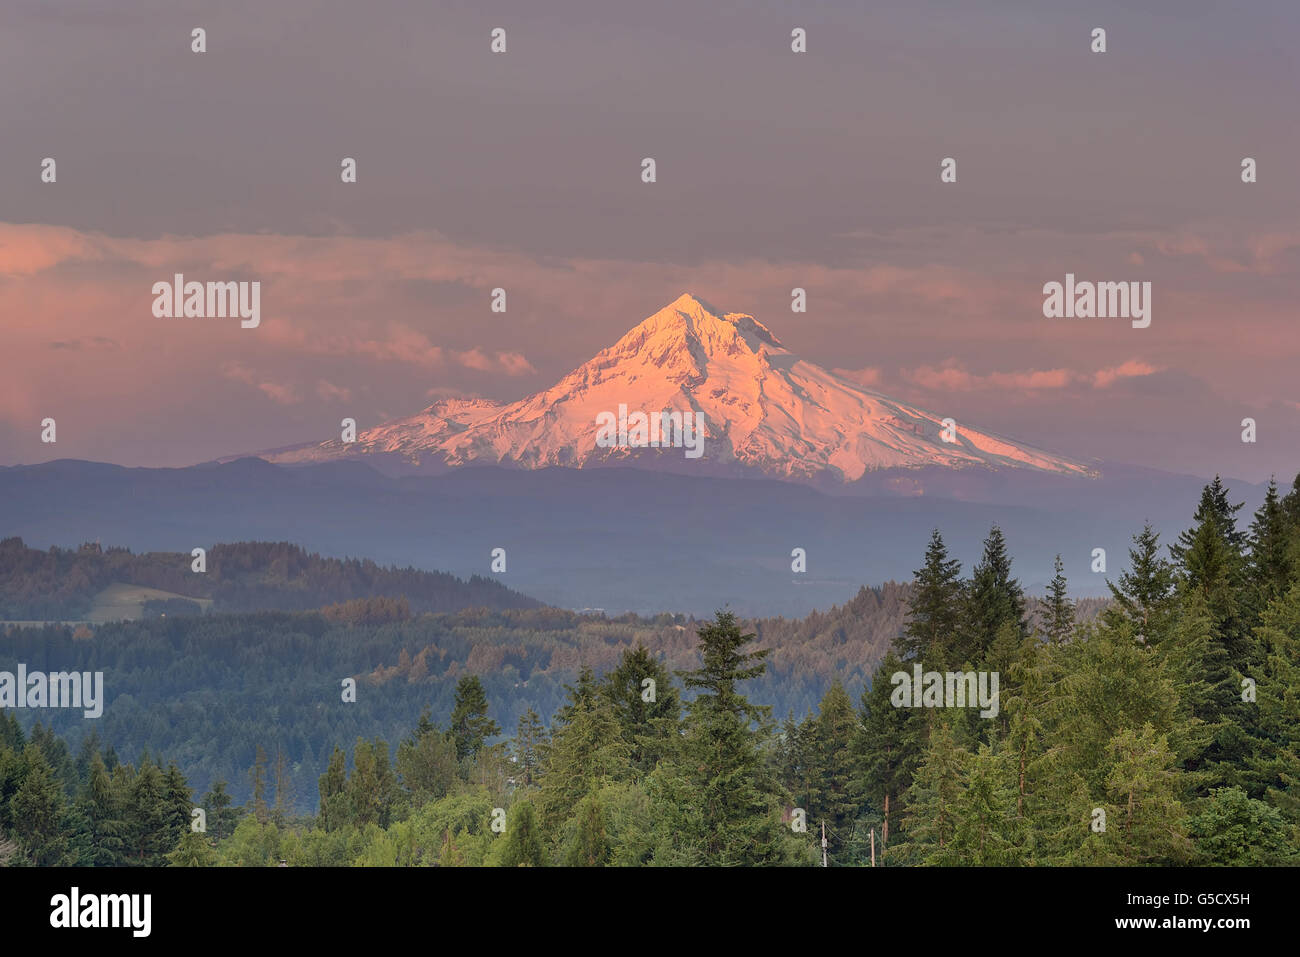 Mount Hood evening alpenglow during sunset from Happy Valley Oregon Stock Photo